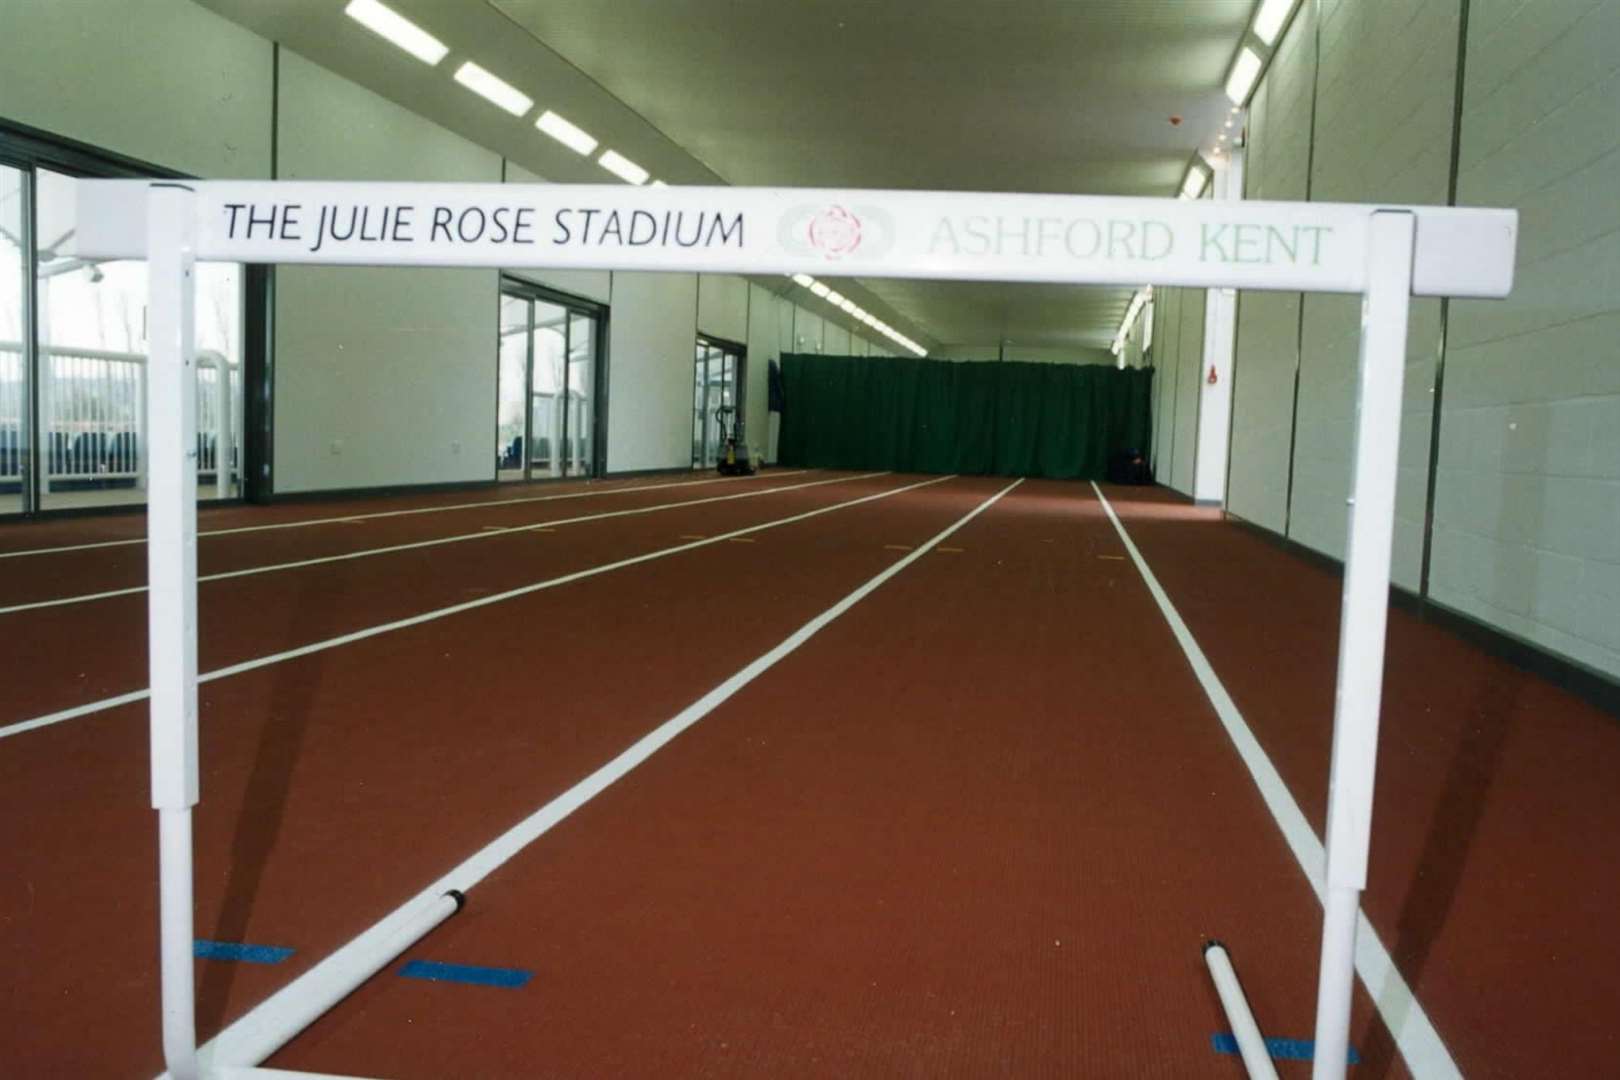 The indoor track at the Julie Rose Stadium is becoming a gym